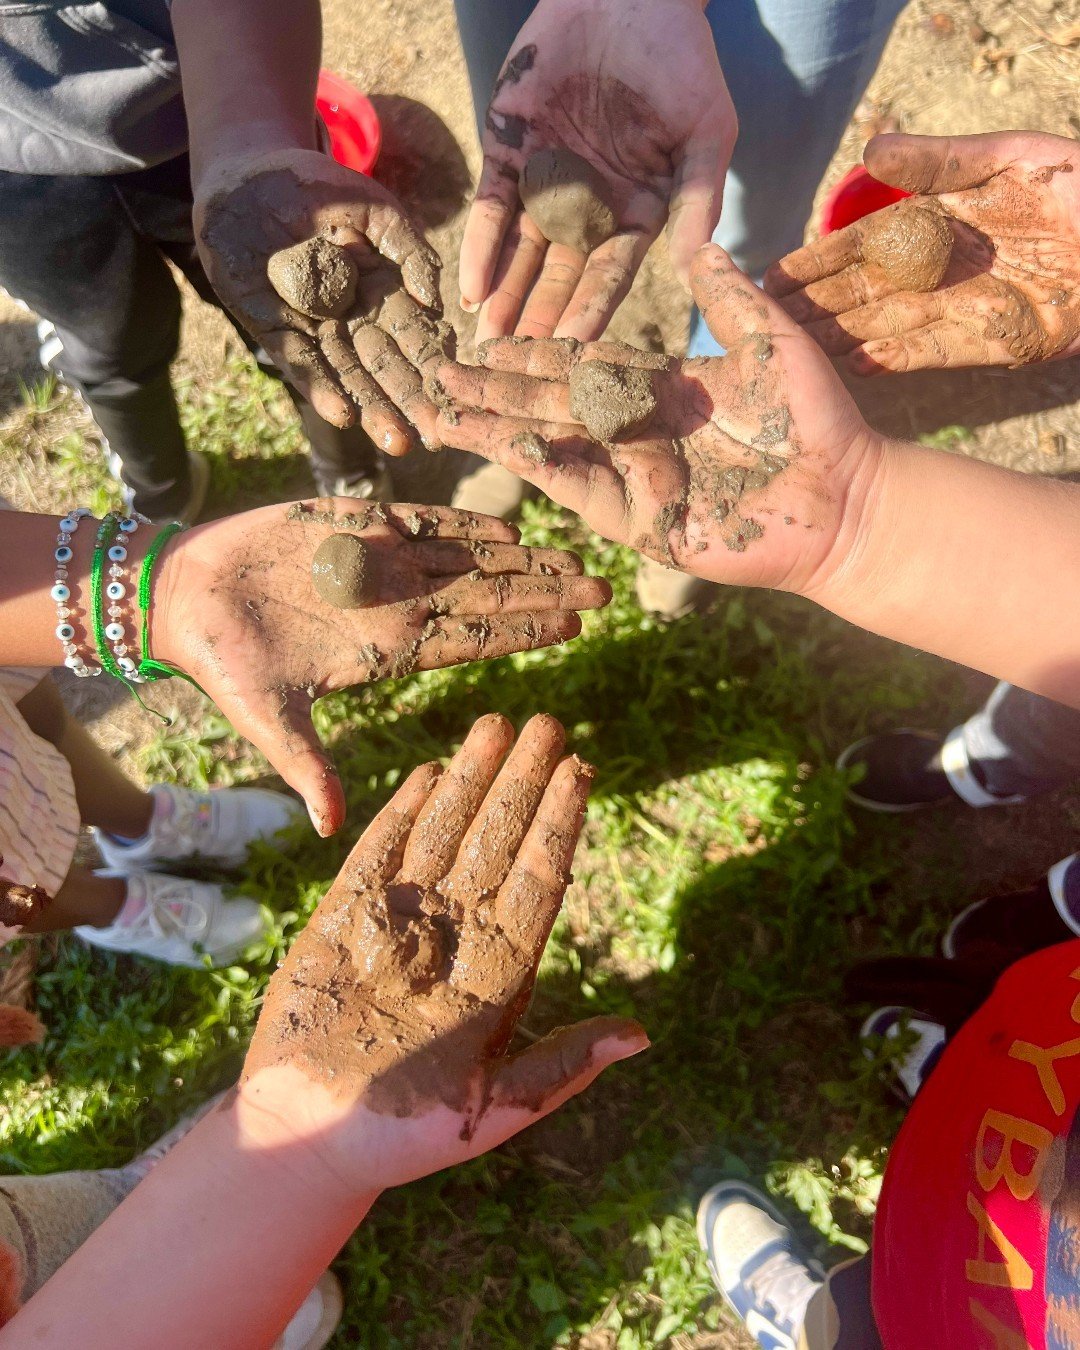 🌍🌱 Happy Earth Day! 🌱🌍

Today, as we celebrate our planet, we are also taking time to reflect on the importance of education and appreciation. At SEEAG, our mission is to educate, inspire, and empower the next generation to care for the Earth and